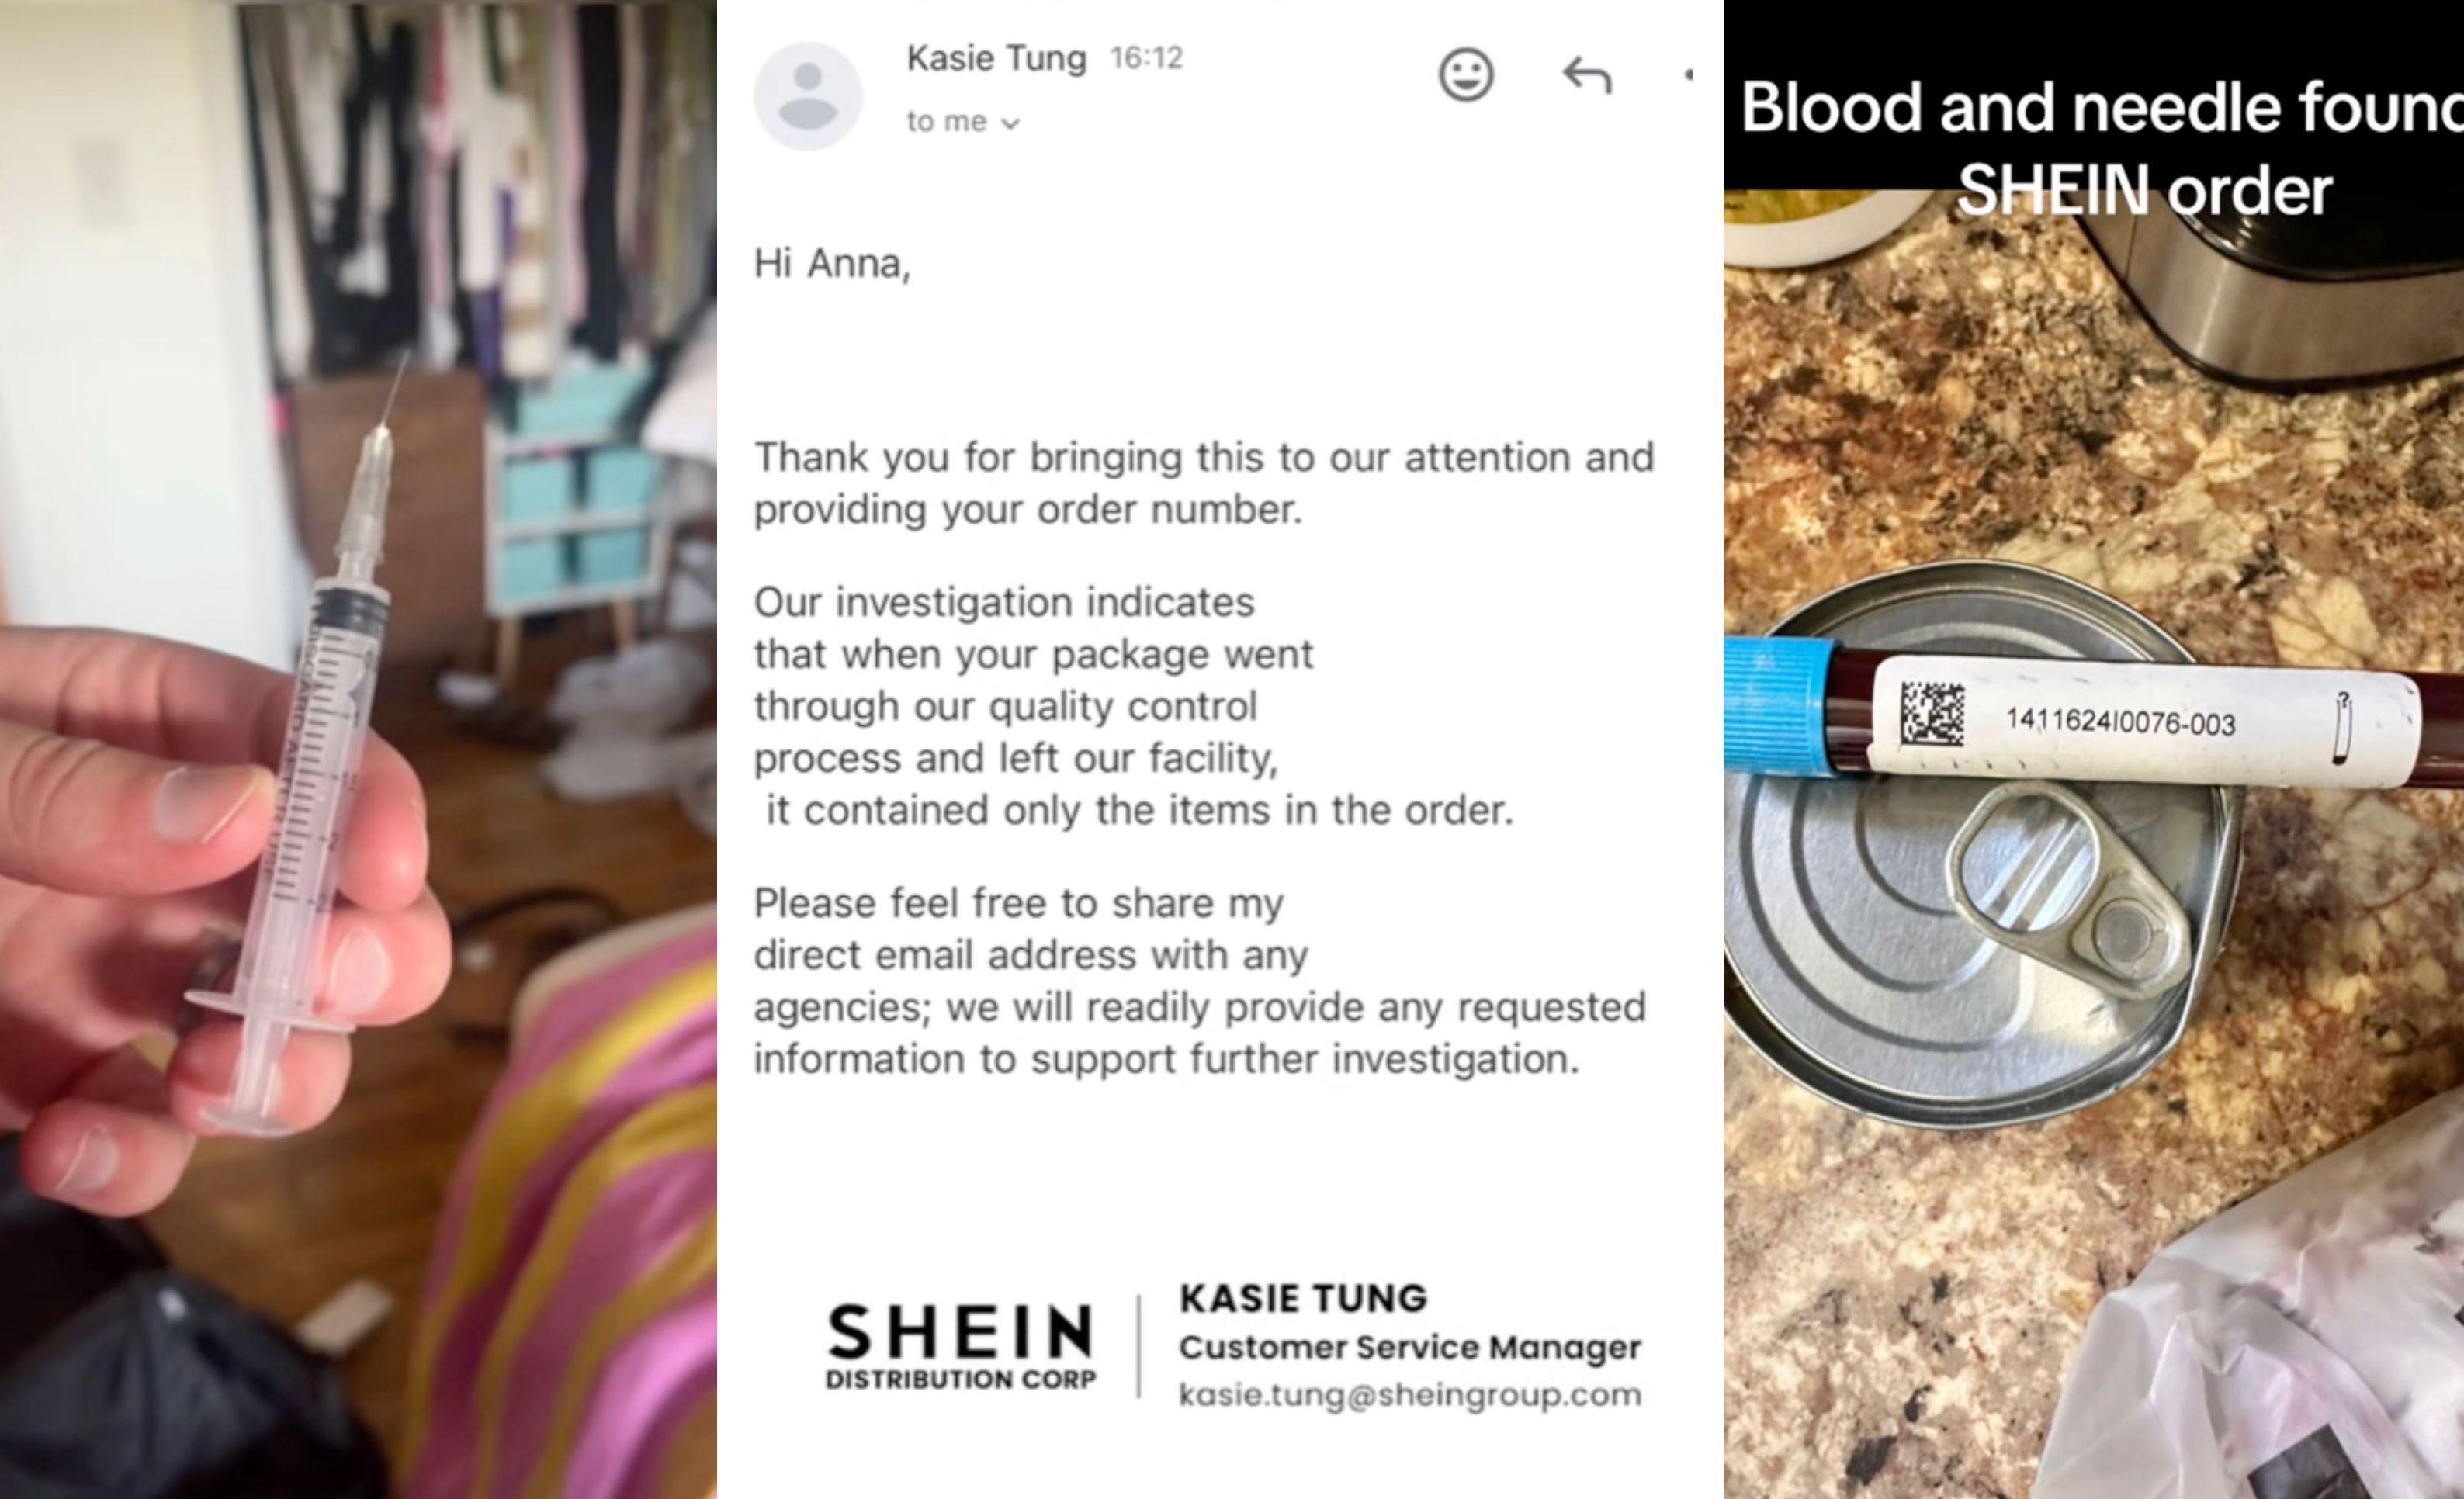 Three screenshots from a TikTok: A hand holding a needle, an email from Shein, and a vial of blood on a can.